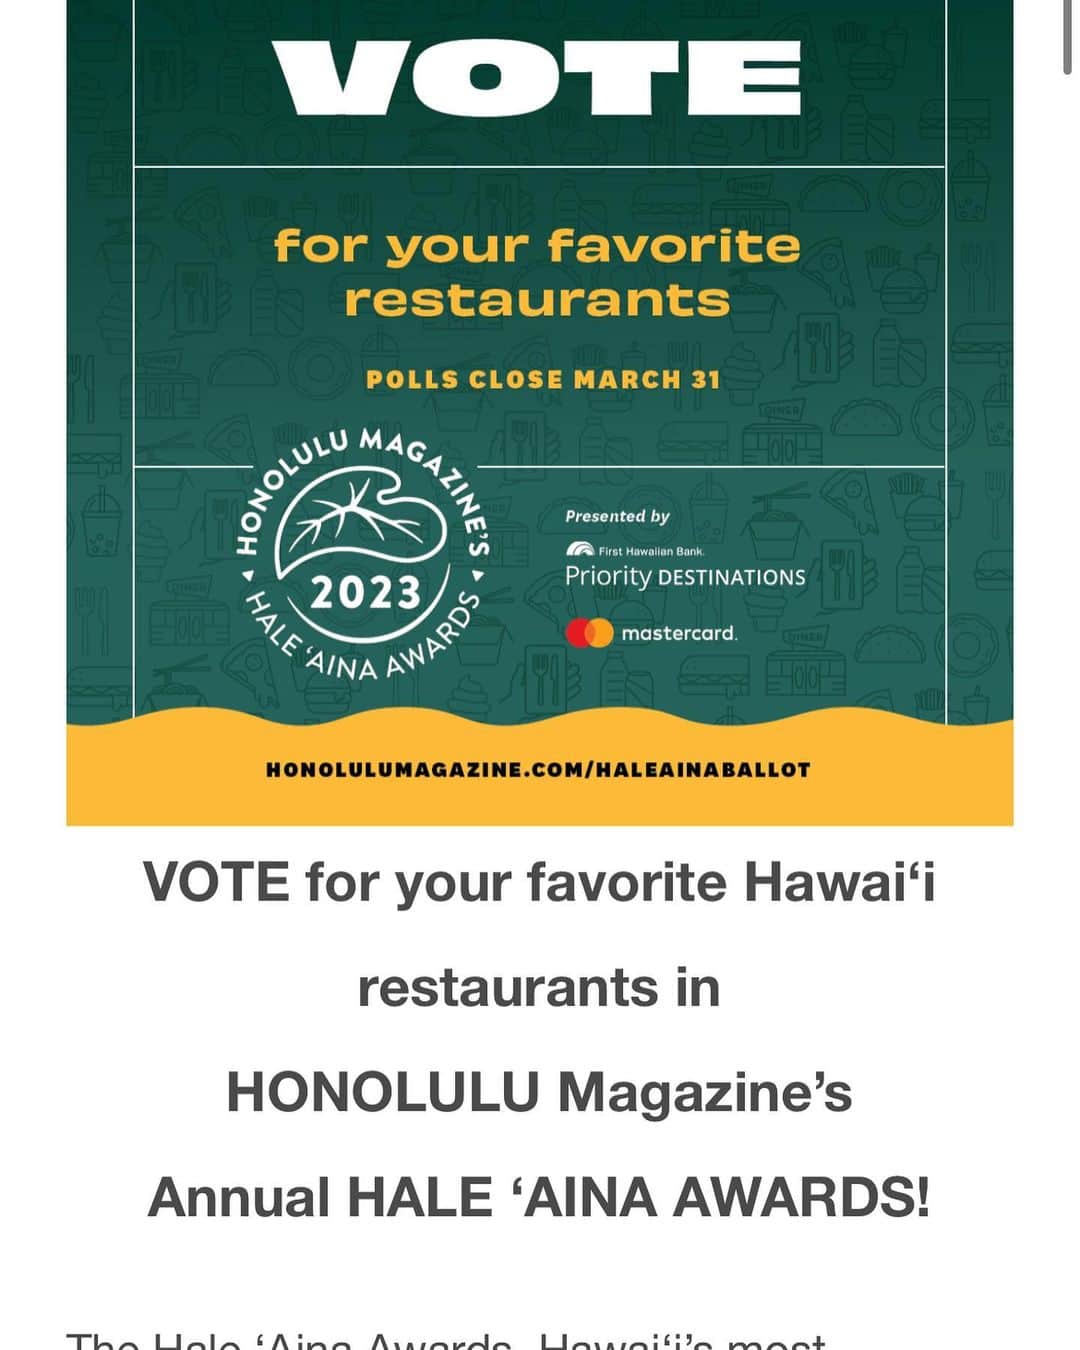 Peace Cafeのインスタグラム：「Voting is now open for this year's Hale 'Aina Awards 23! Please vote for PeaceCafe as your favorite vegetarian restaurant. ❤️   🎯What a deal, if you vote by March 31, 2023, you'll be entered in a drawing to win a $250 dining voucher!🎉🍾  They ask that you vote for only one restaurant per category by filling out the fields below.  https://vote.honolulumagazine.com/  #haleainaawards #vote #hawaii #peace #vegan #honolulumagazine #awards #vegitarian #win #restaurants」